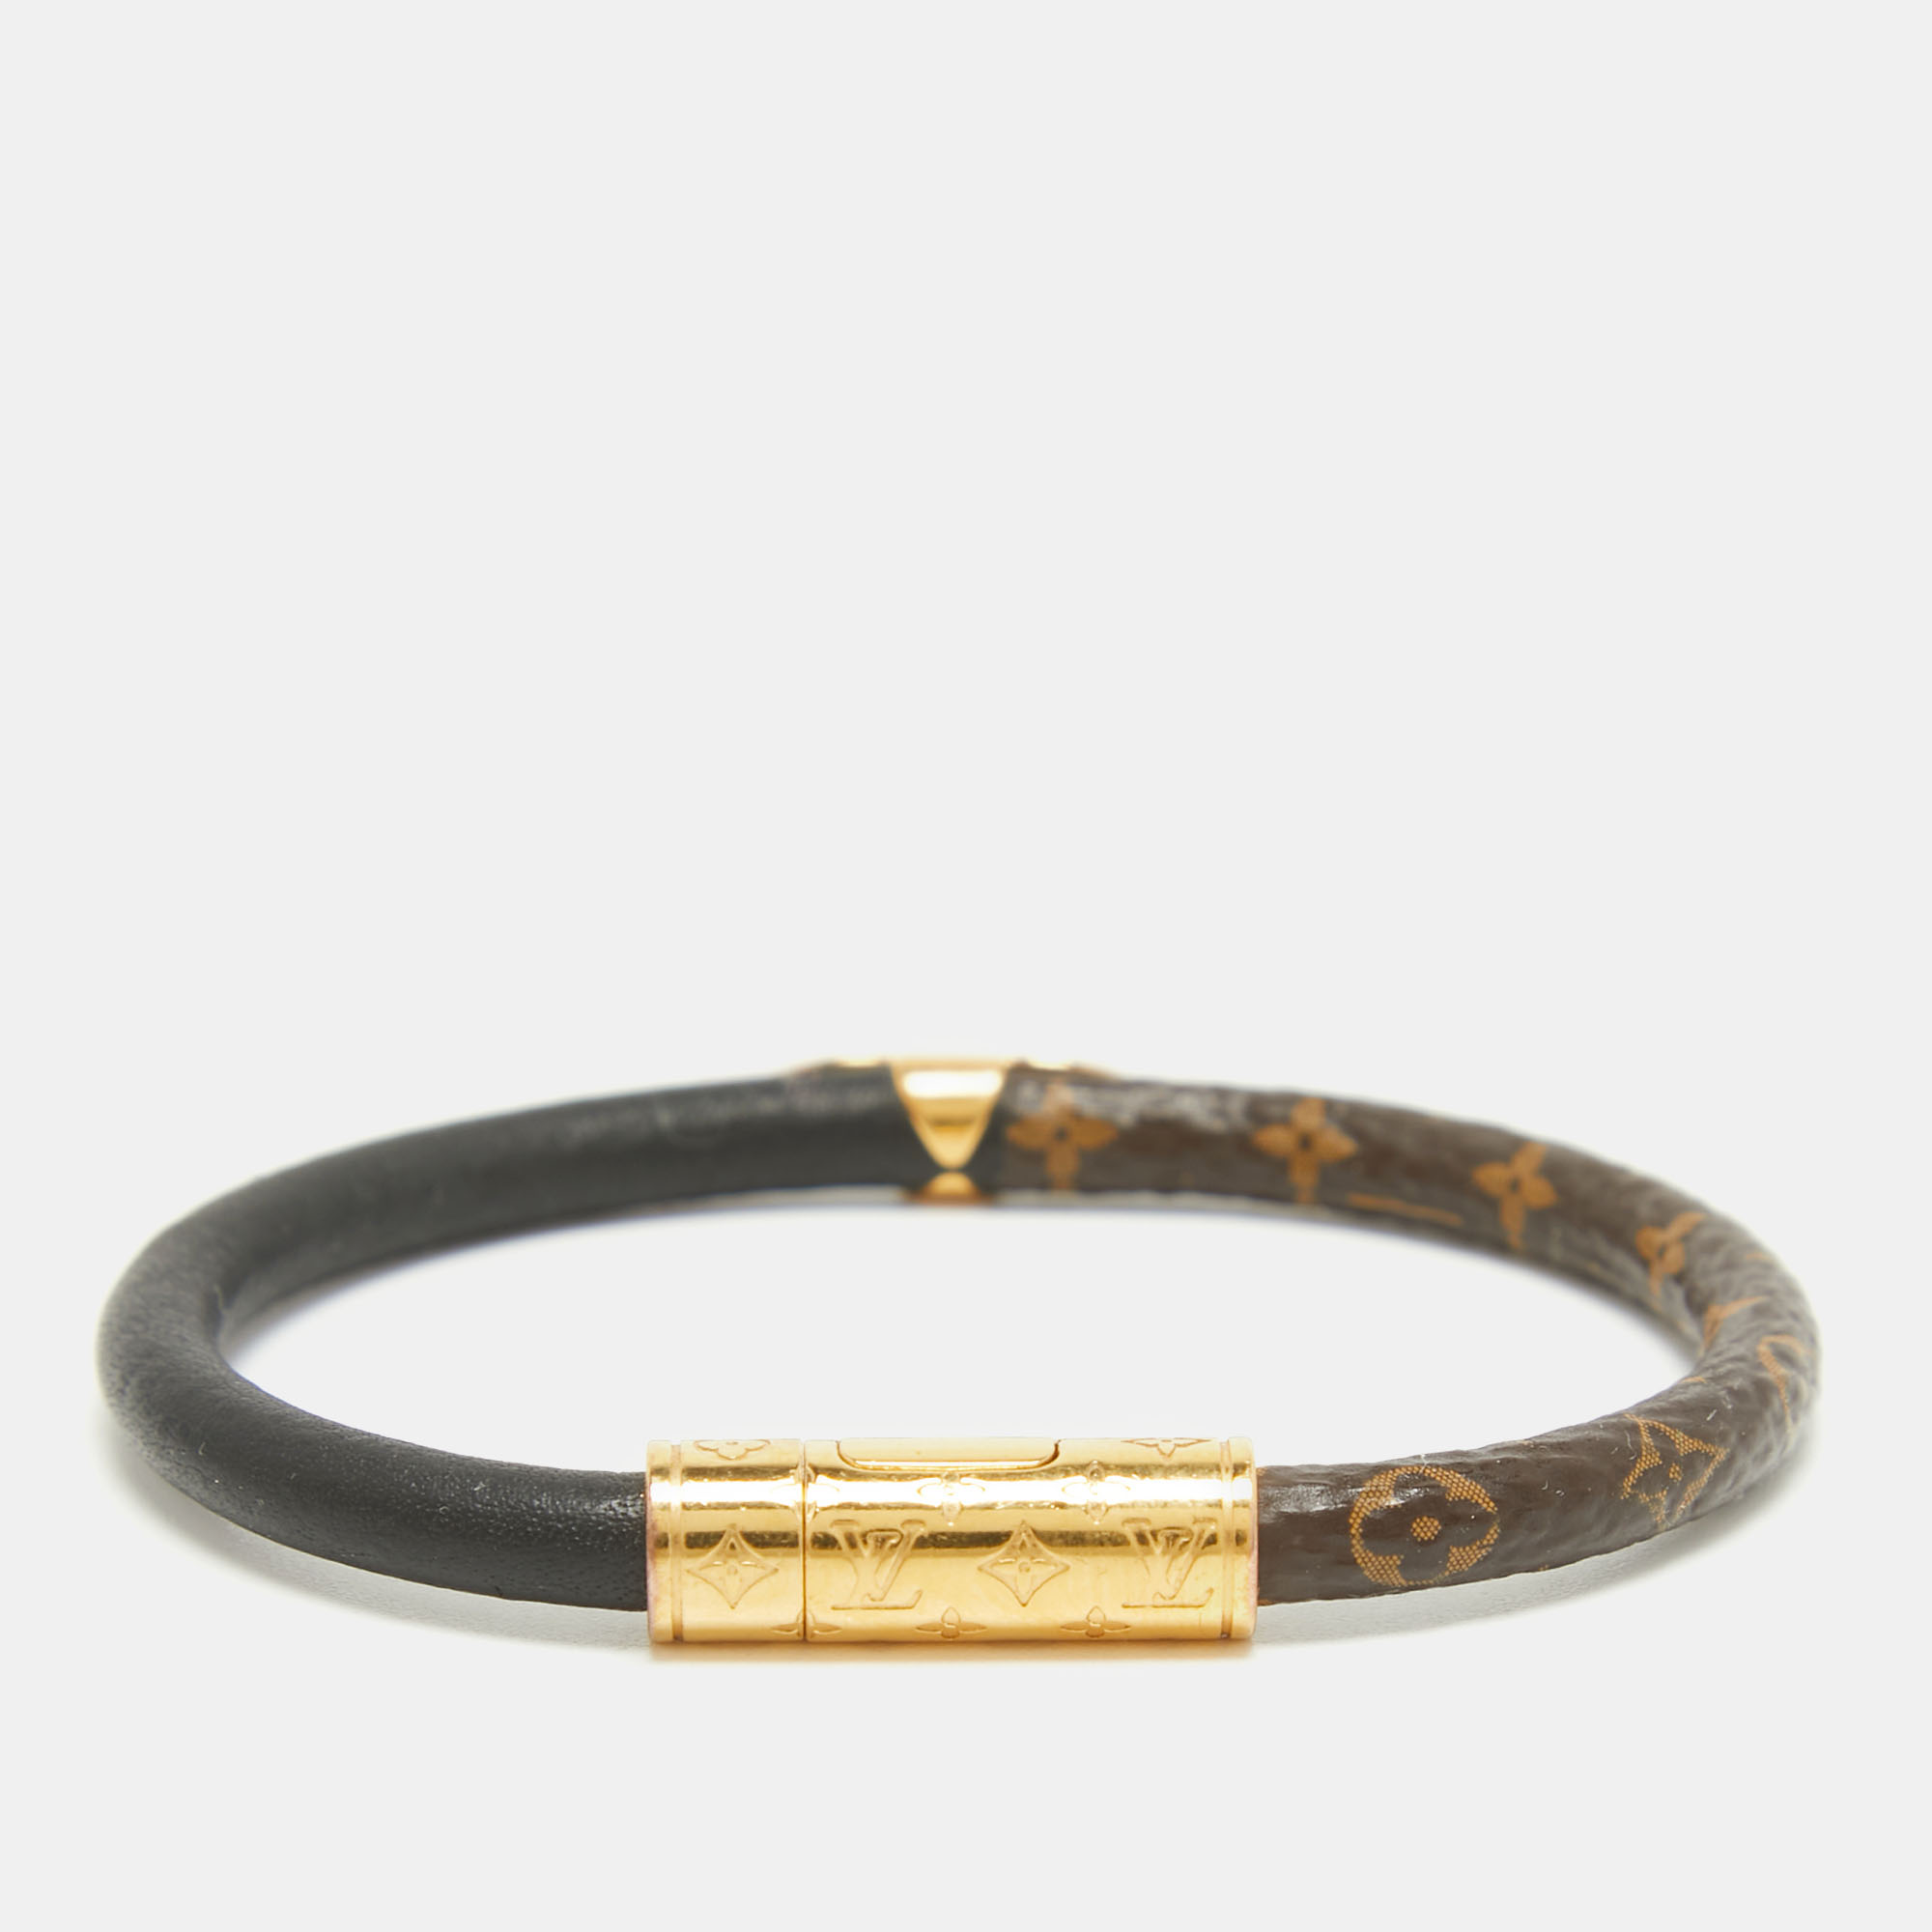 This Louis Vuitton creation is a unique charm to uplift your style made from the combination of signature monogram canvas and black leather. This Daily Confidential bracelet is designed with gold tone metal inserts and features signature symbols for a fine finish.